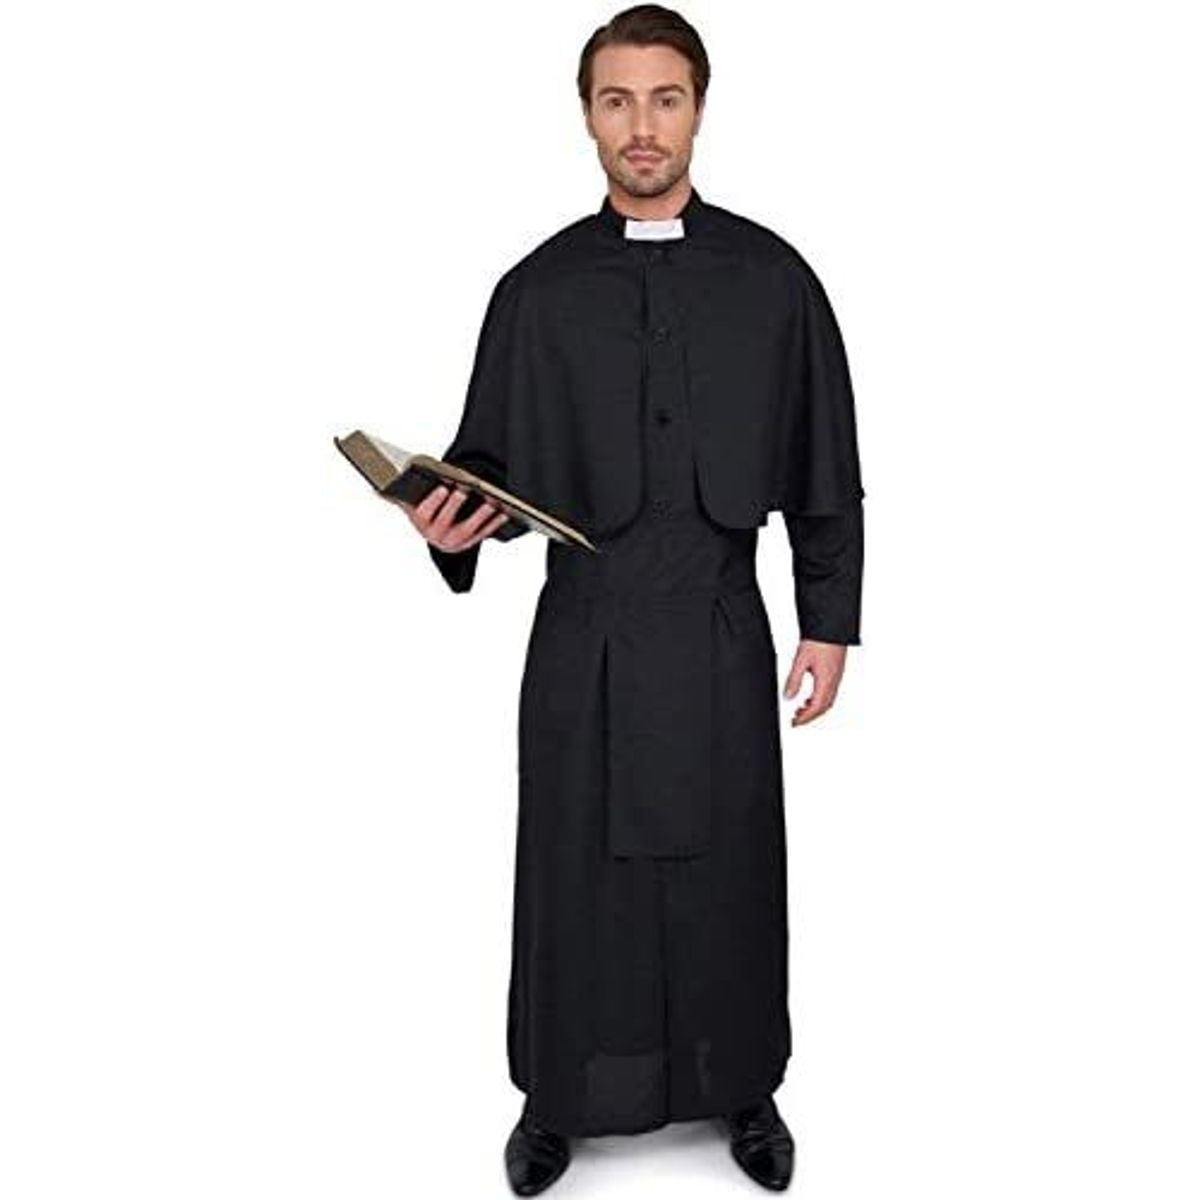 MENS EXORCIST COSTUME PRIEST BOOK TV FILM CHARACTER FANCY DRESS HALLOWEEN OUTFIT 